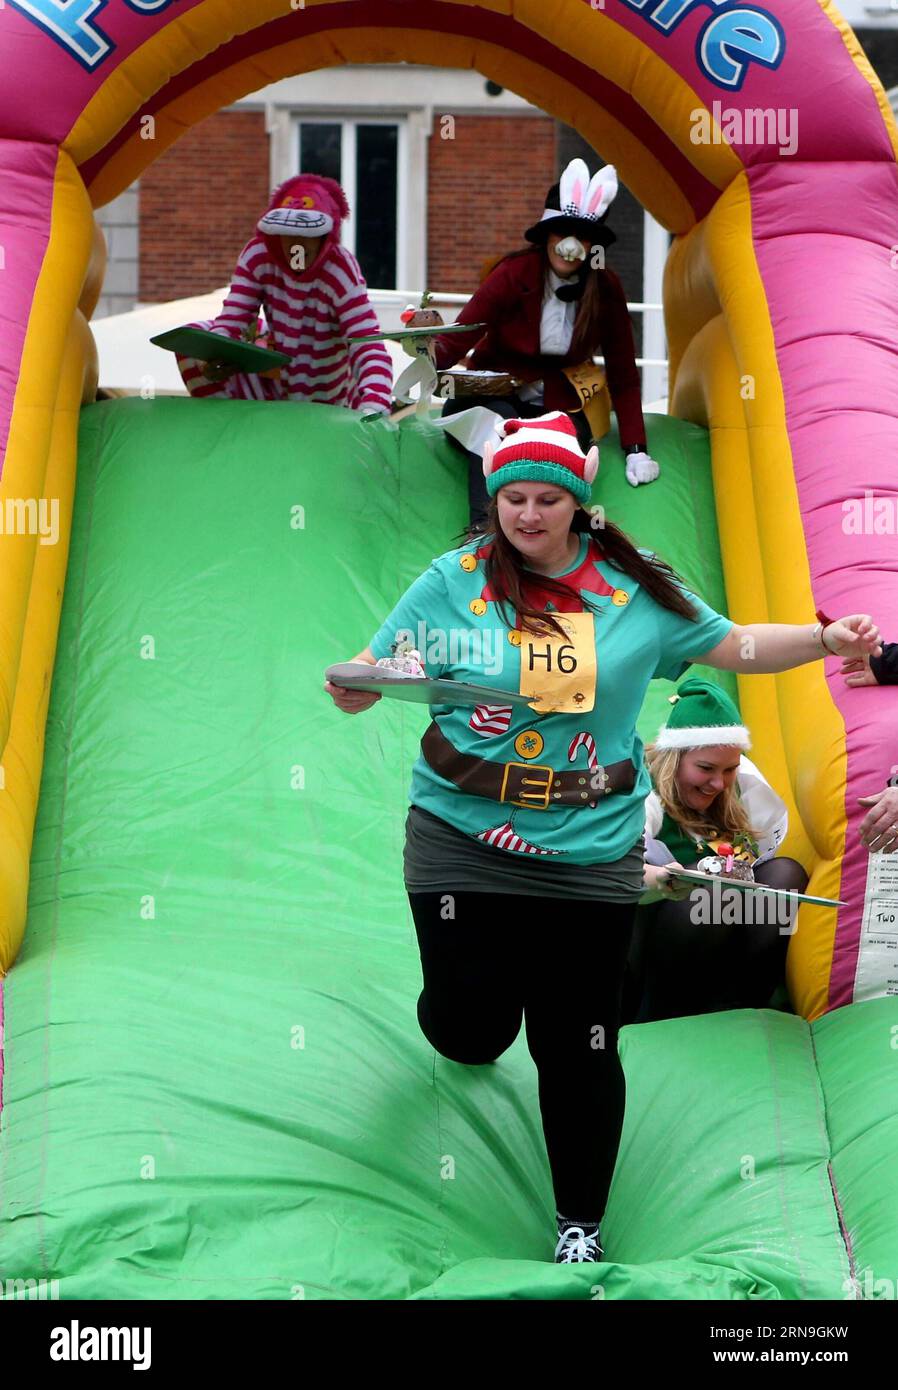 (151205) -- LONDON, Dec. 5, 2015 -- Participants cross the airbed slide in the 35th Great Christmas Pudding Race in a bid to raise money for Cancer Research UK and build up to the festive Christmas season at the Covent Garden in London, Britain, on Dec. 5, 2015. ) BRITAIN-LONDON-35TH GREAT CHRISTMAS PUDDING RACE HanxYan PUBLICATIONxNOTxINxCHN   151205 London DEC 5 2015 Participants Cross The airbed Slide in The 35th Great Christmas Pudding Race in a BID to Raise Money for Cancer Research UK and BUILD up to The Festive Christmas Season AT The Covent Garden in London Britain ON DEC 5 2015 Britai Stock Photo